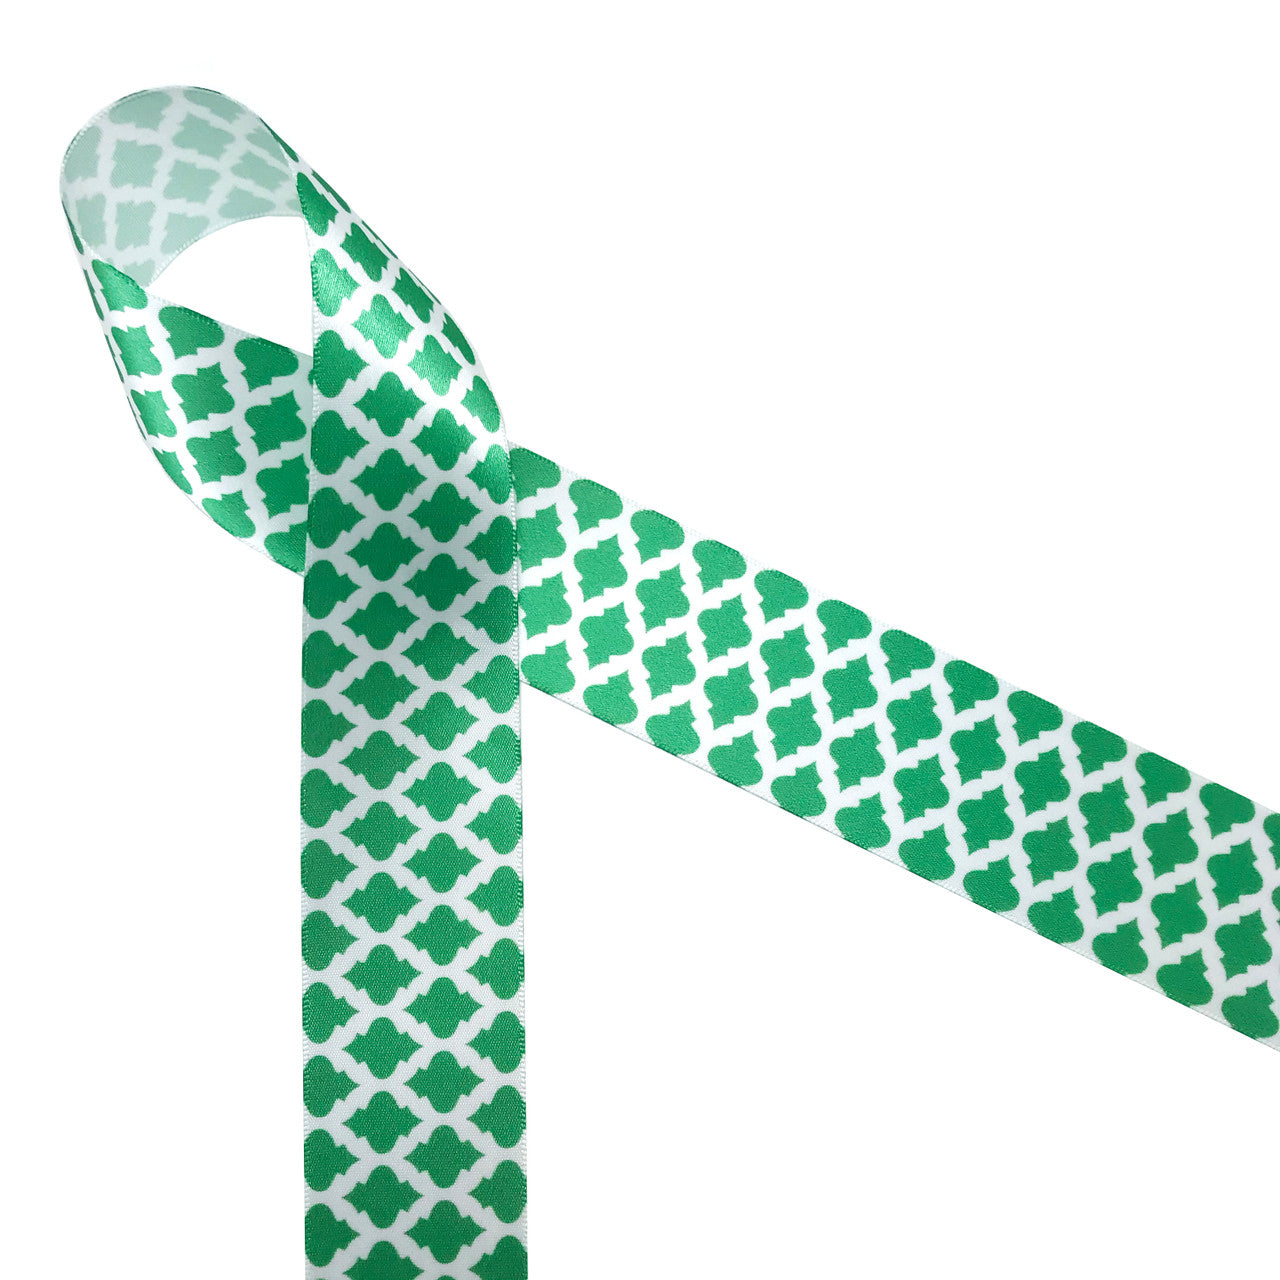 Emerald Green quatrefoil pattern Ogee design in ideal for gift wrap, preppy hair bows, equestrian hair bows, home decor and packaging. This is an ideal ribbon for trimming  bags, purses and quilts too! Be sure to have this beautiful ribbon on hand for your crafting needs! Our ribbon is designed and printed in the USA